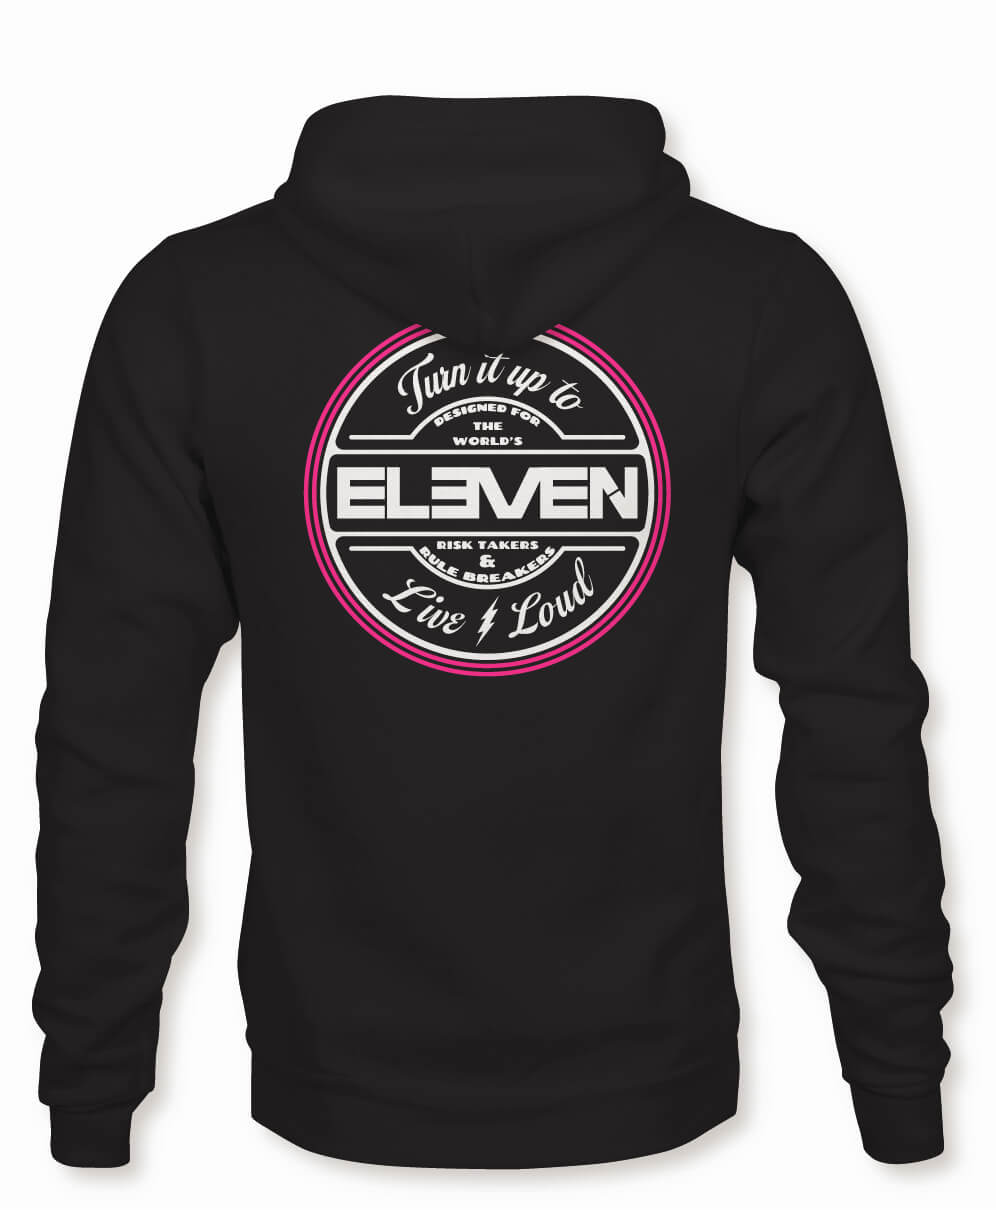 TURN IT UP TO ELEVEN · LIVE LOUD WHITE PINK ROUND LOGO ON BLACK EVENTIDE HOODIE - ELEVEN